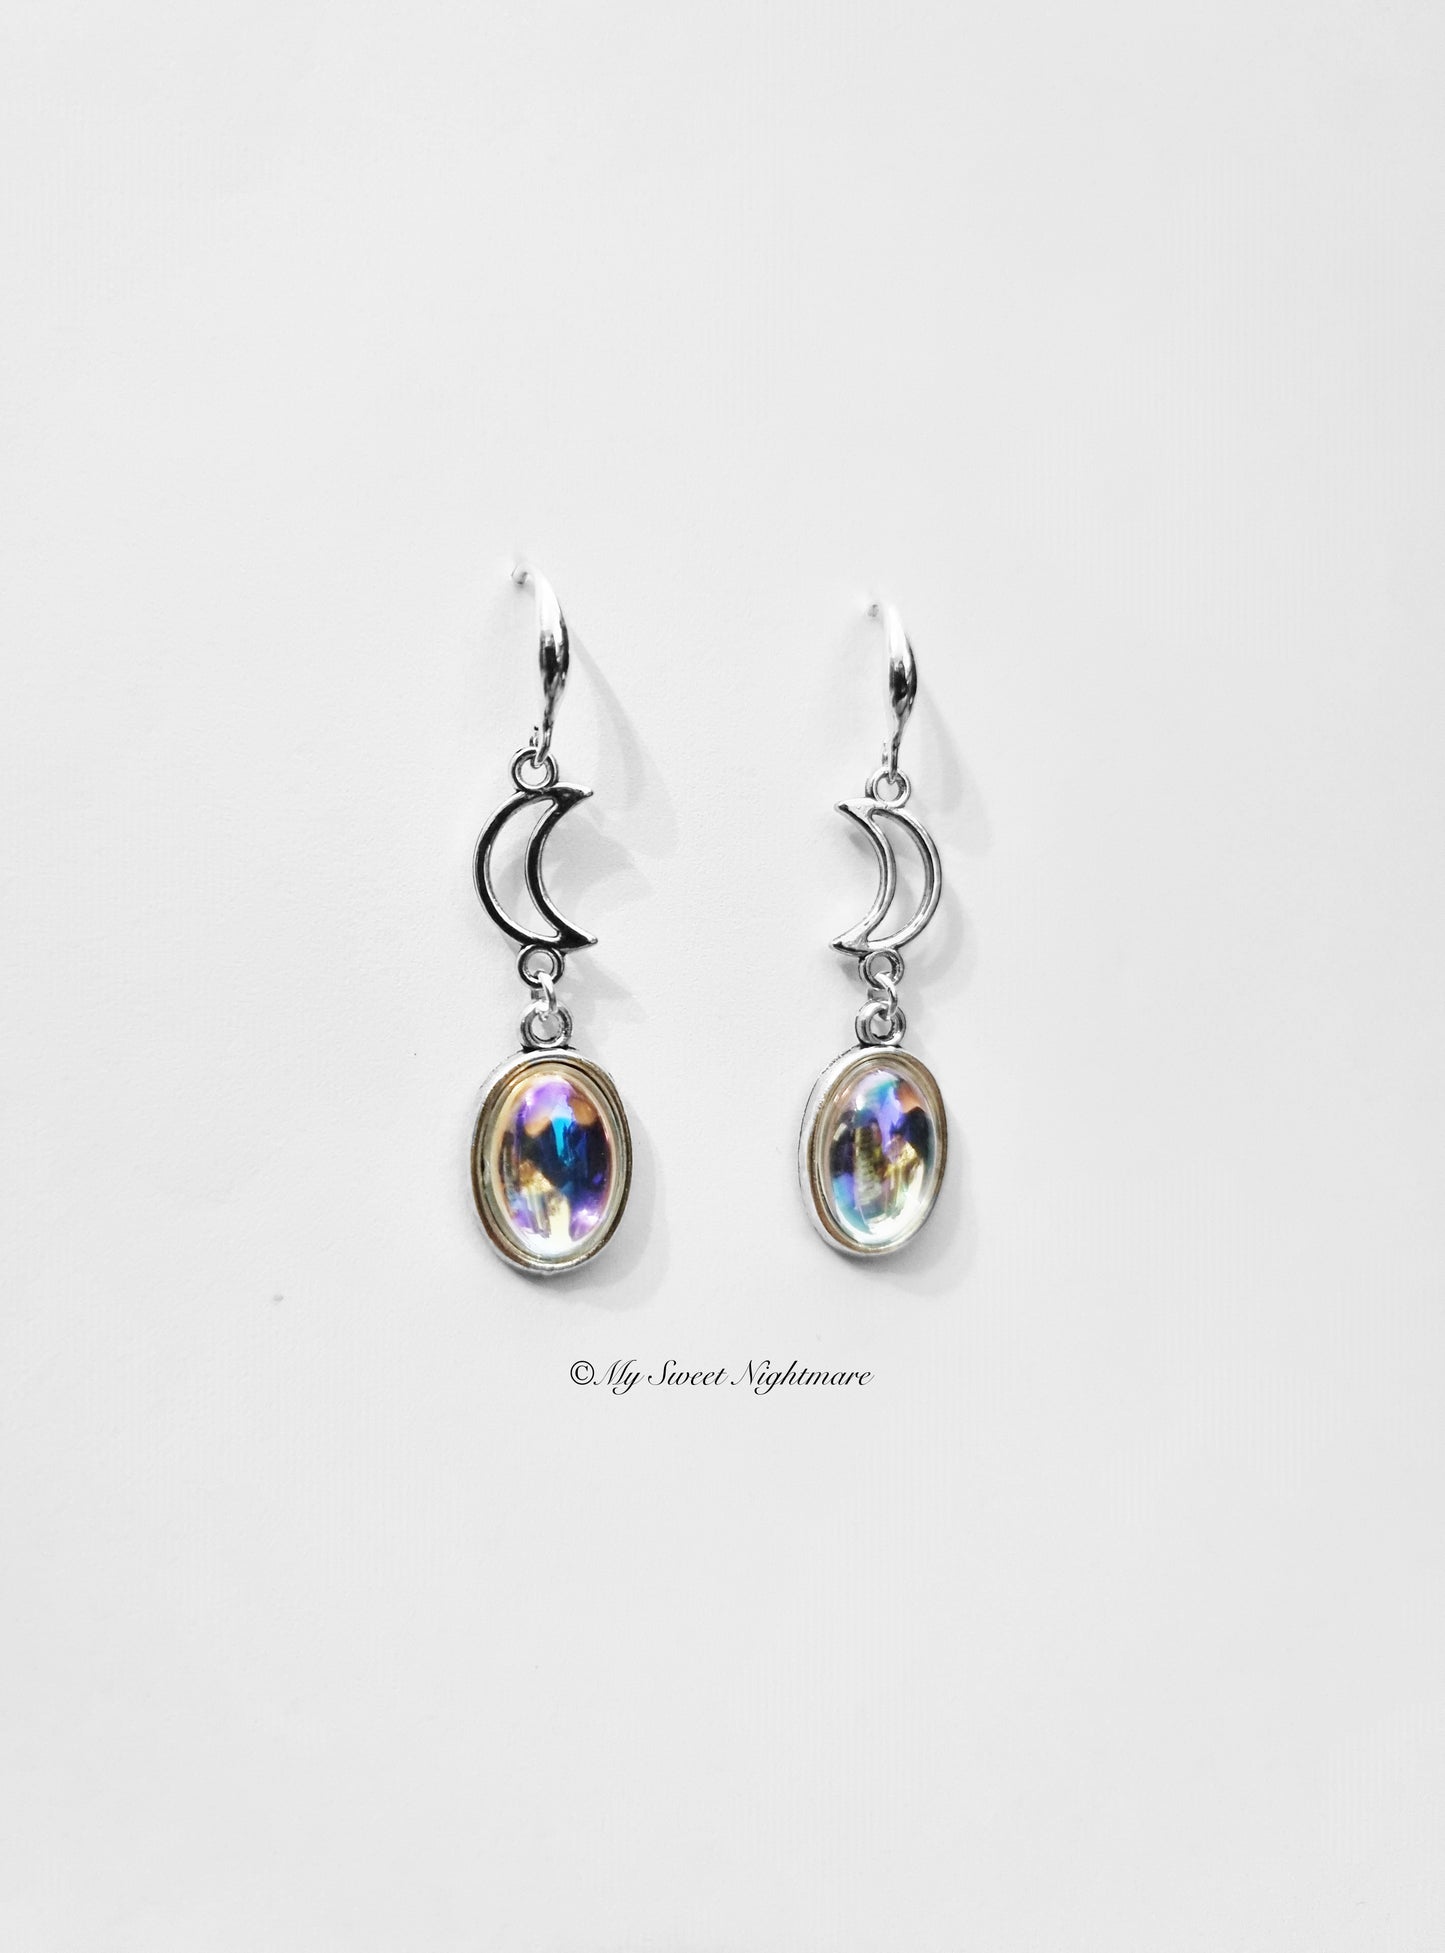 Earrings with hanging moons 